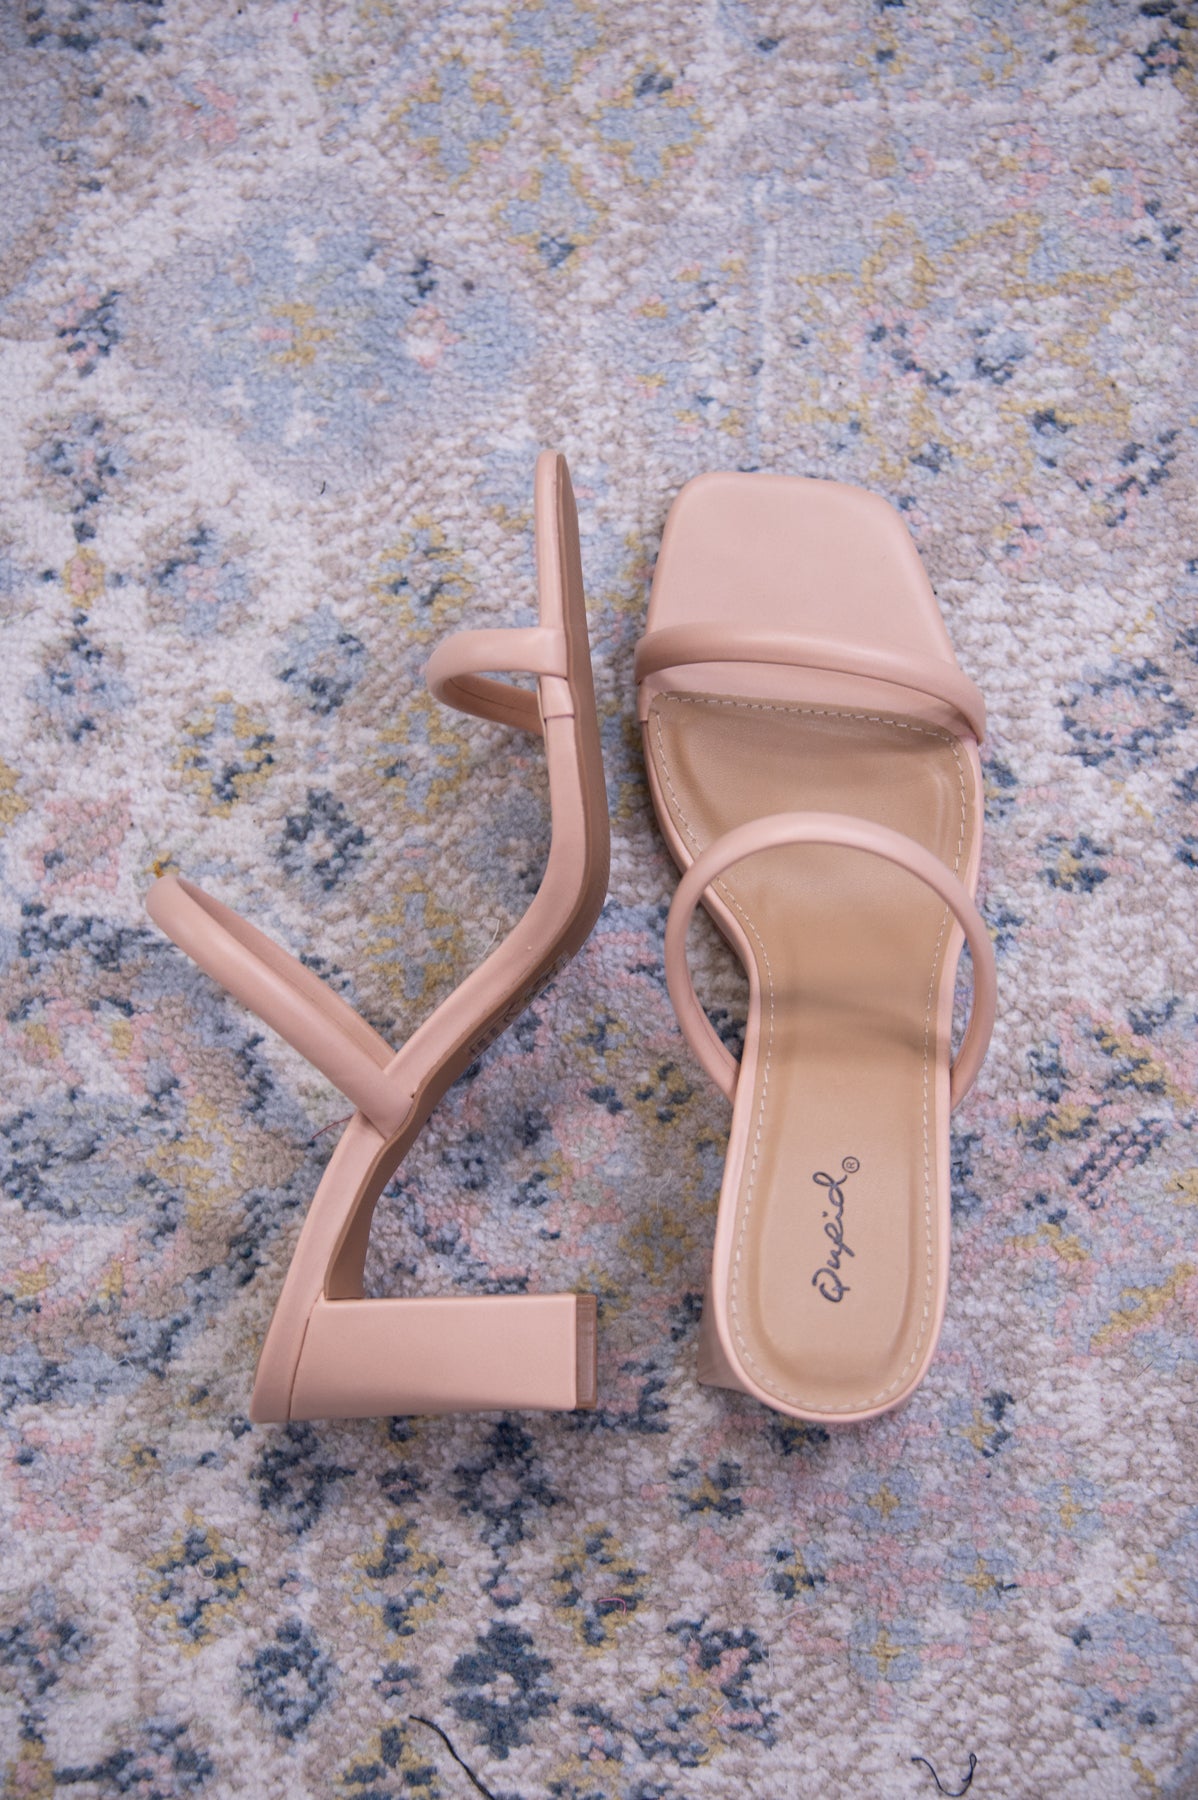 Serious About Style Nude Slip On Heels - SHO2584NU